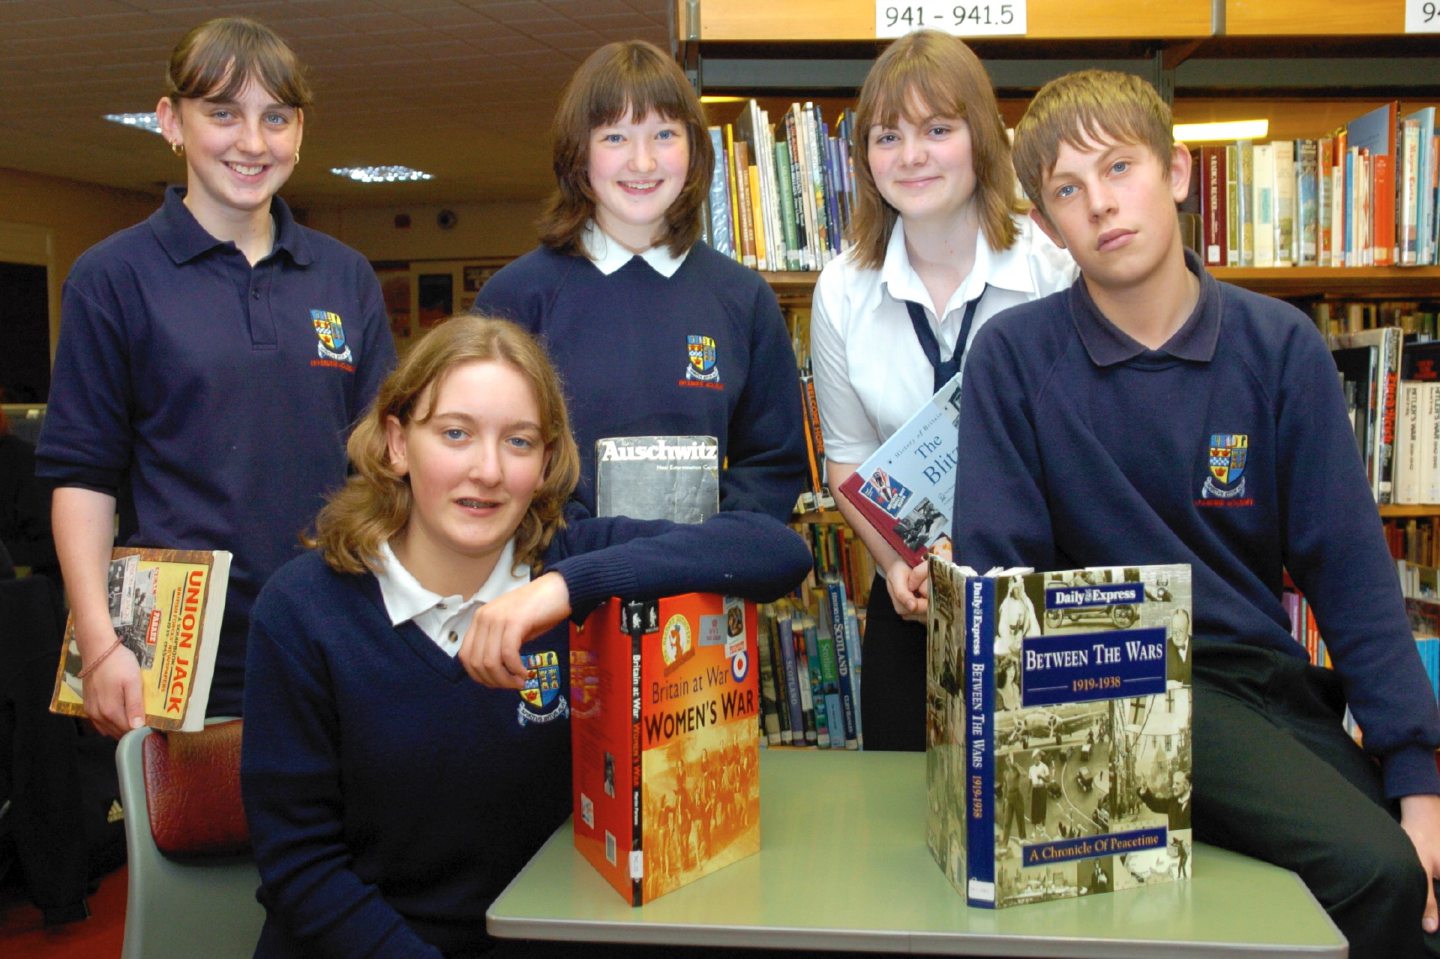 Inverurie Academy pupils posing for photos in the library with some books about war